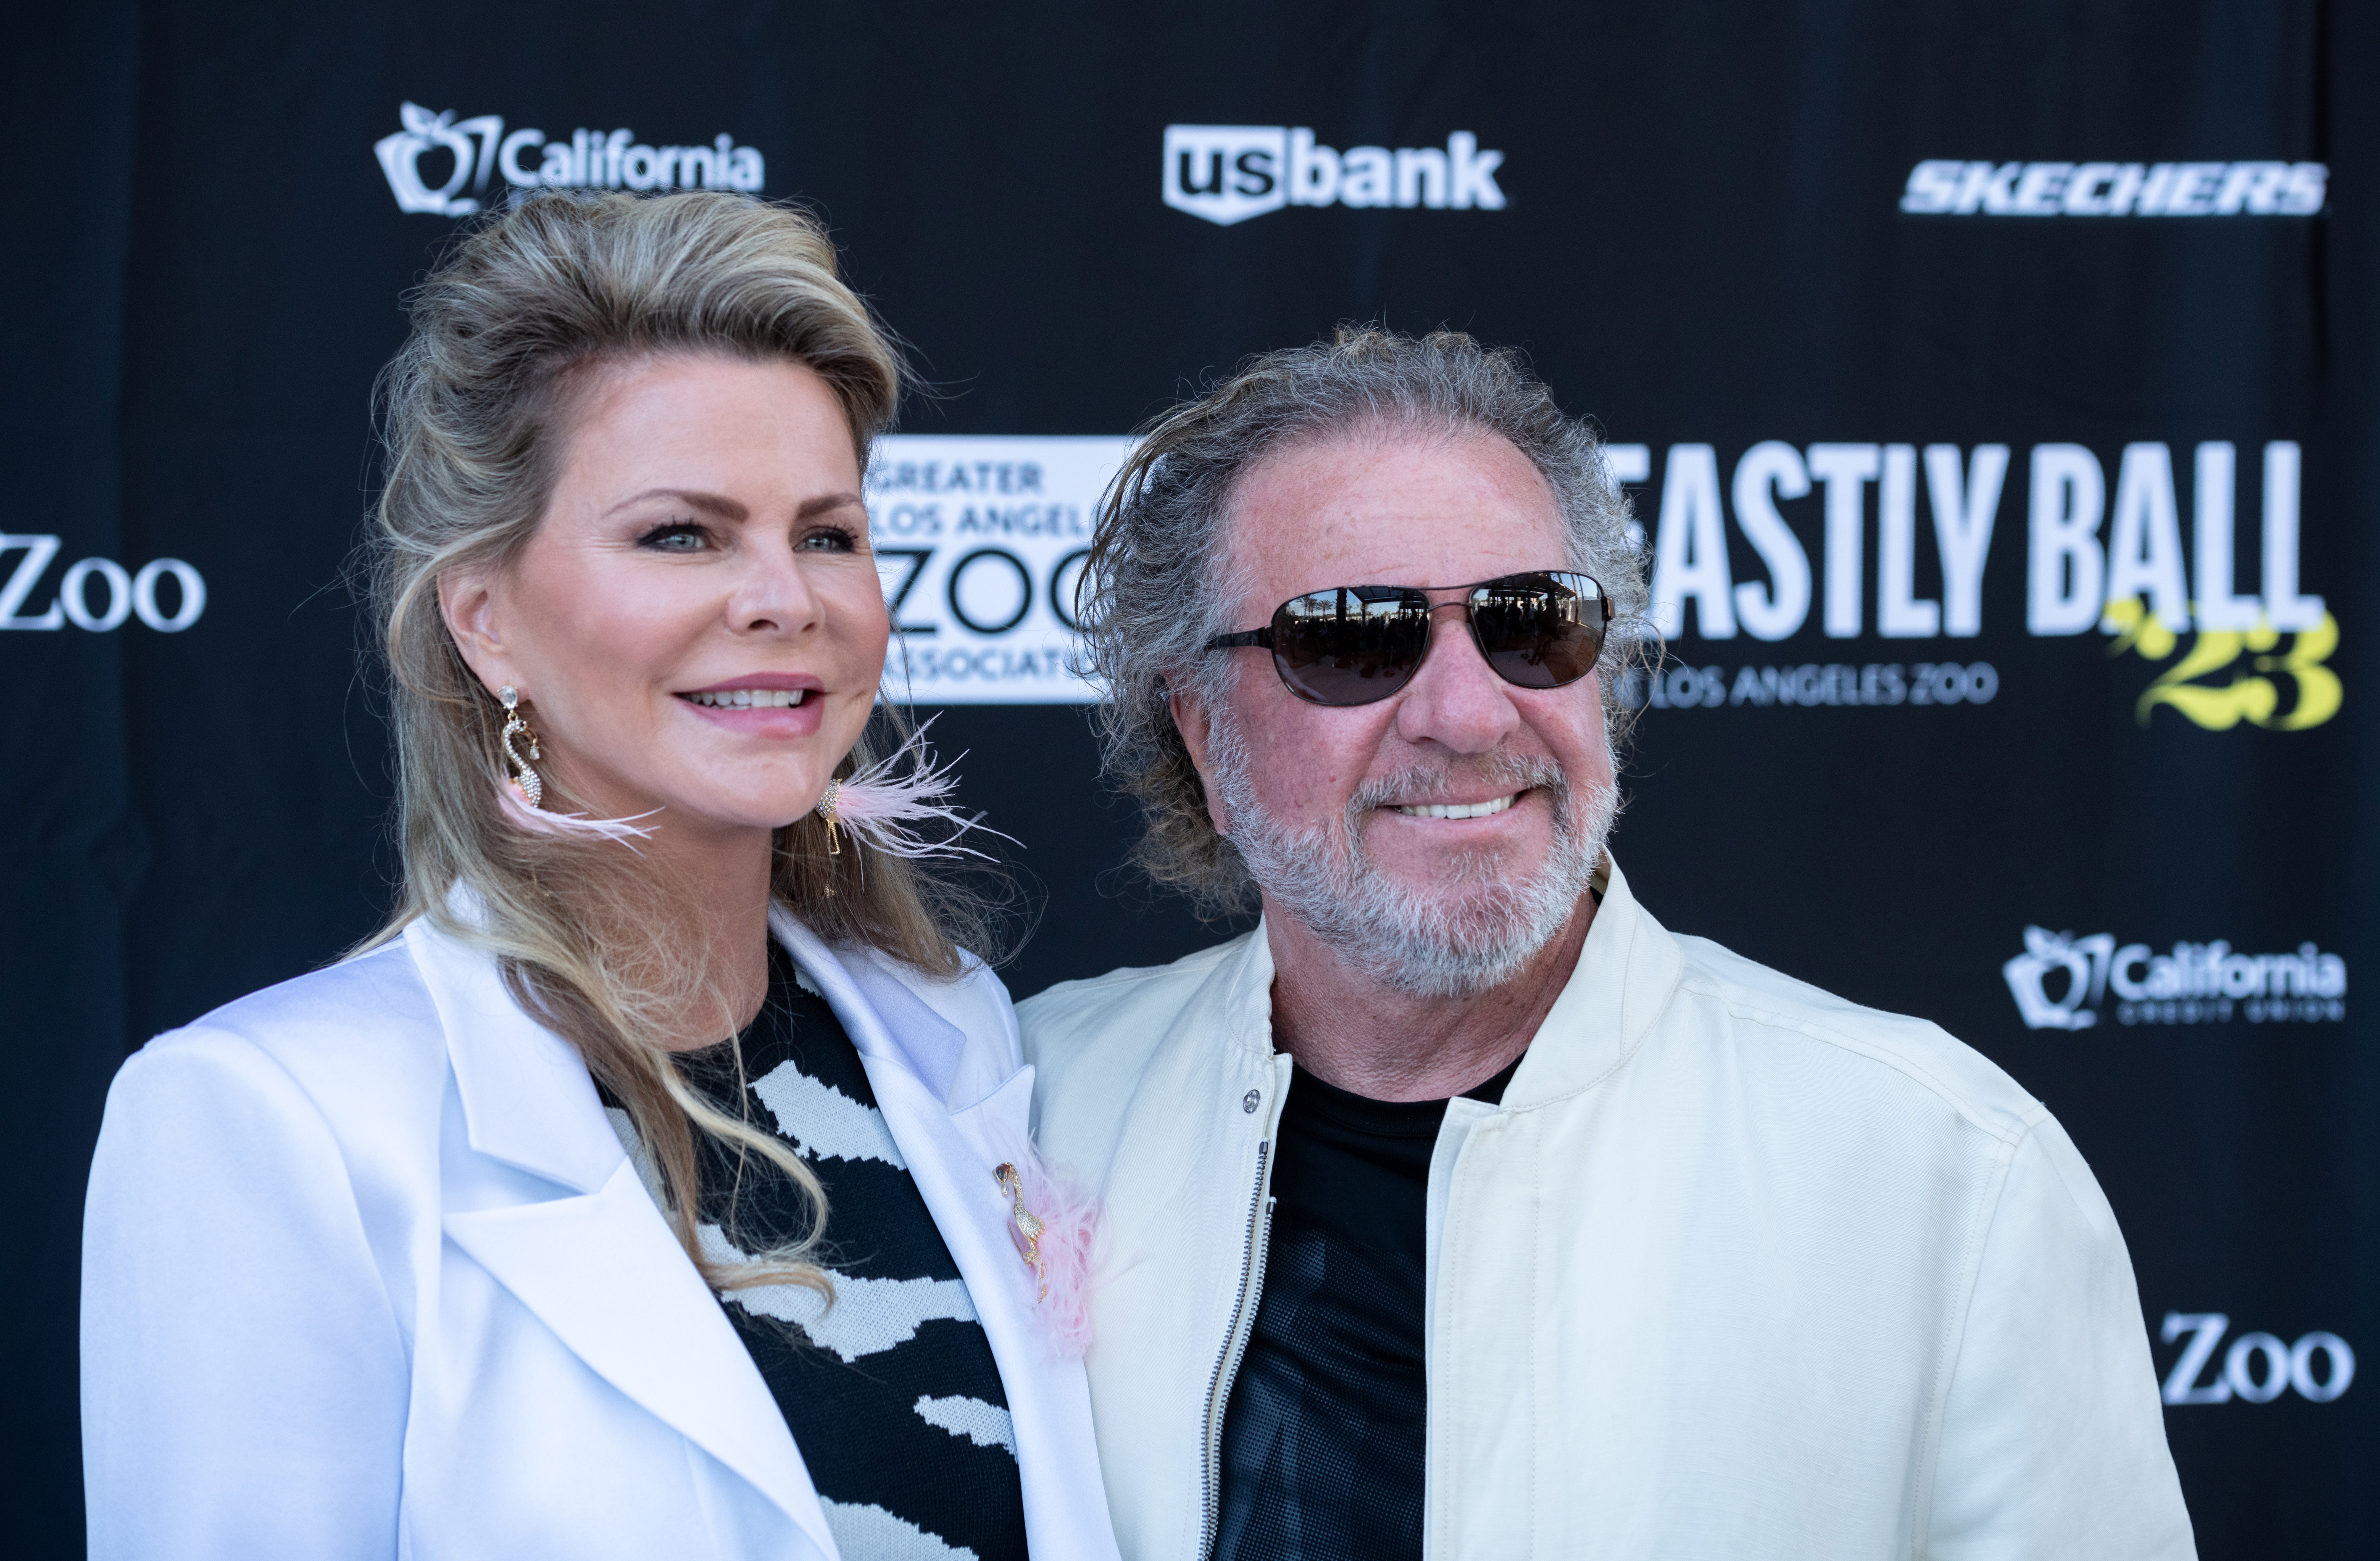 Kari Karte and Sammy Hagar attend the Greater Los Angeles Zoo Association's Beastly Ball 2023 at the Los Angeles Zoo on June 3, 2023, in Los Angeles, California. | Source: Getty Images